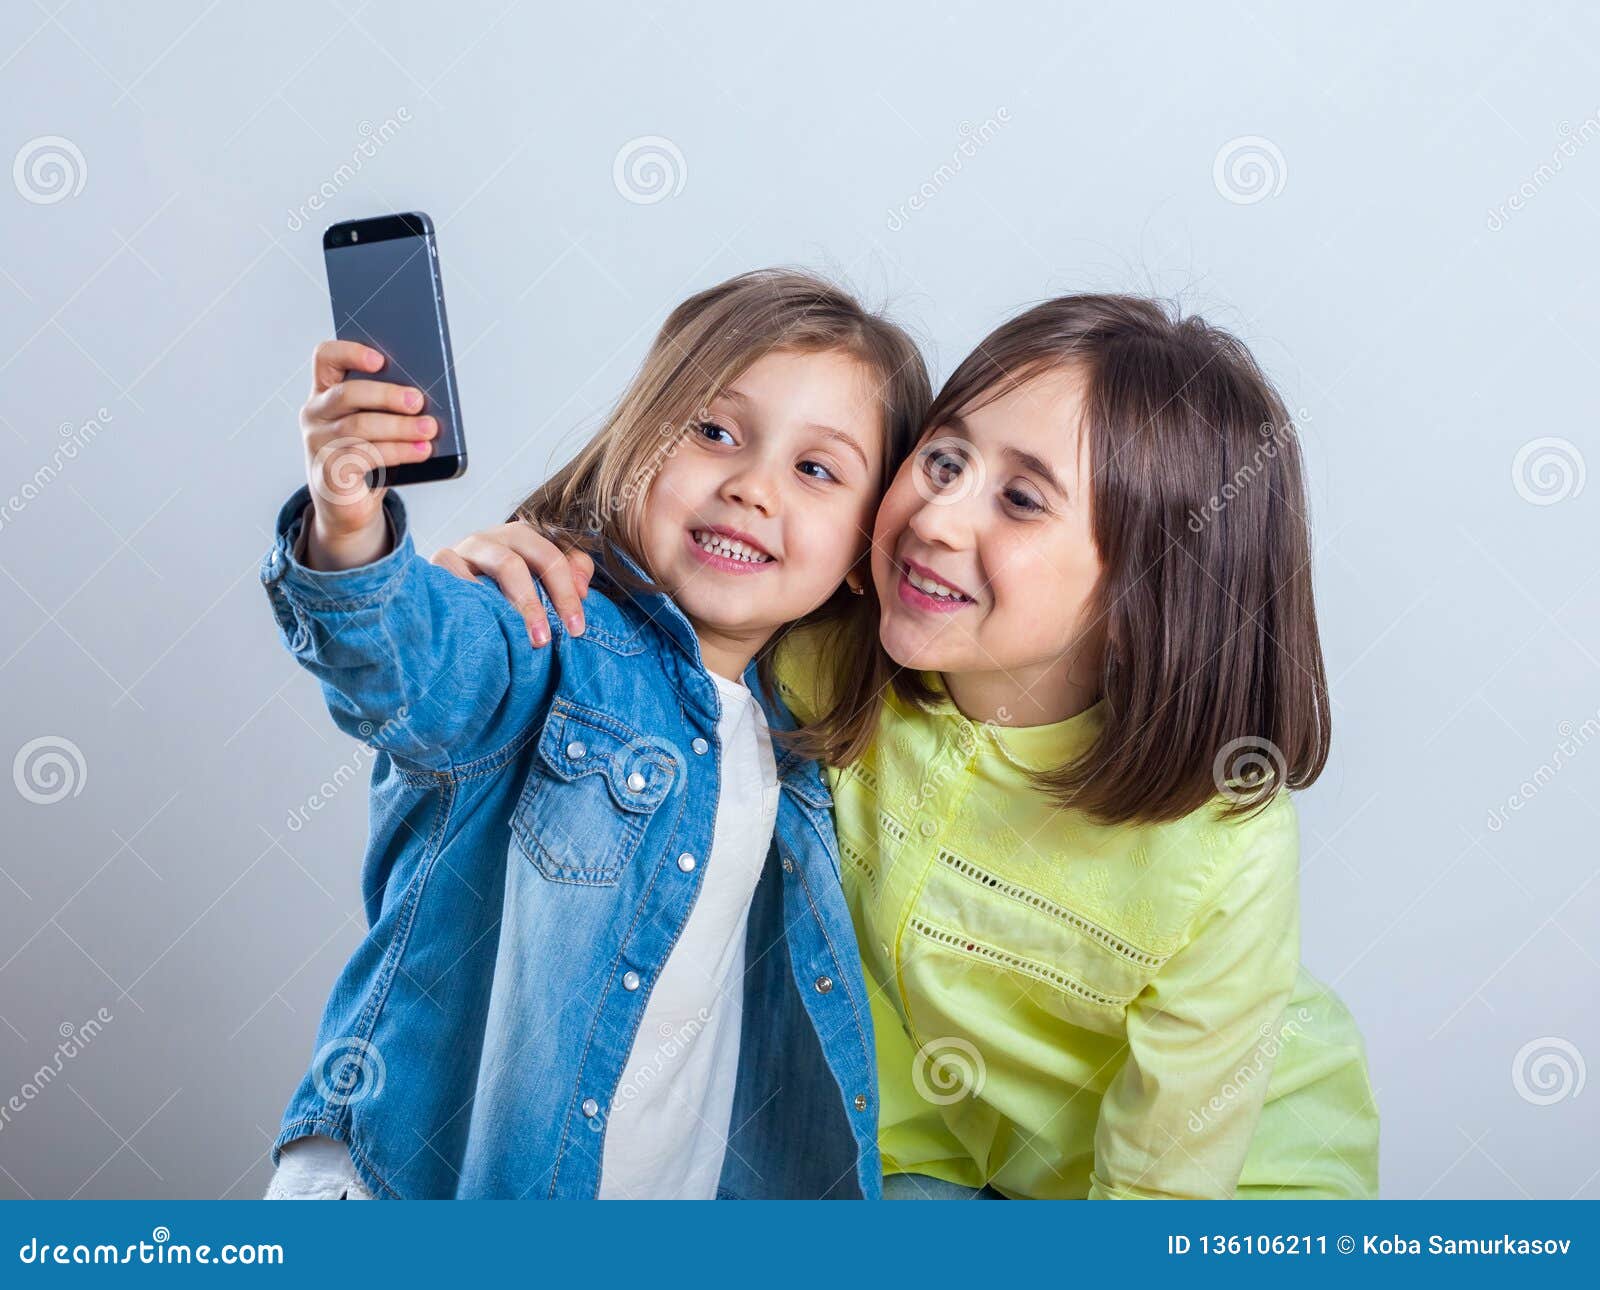 Two Sisters Posing and Taking Selfies in the Studio Stock Image - Image ...